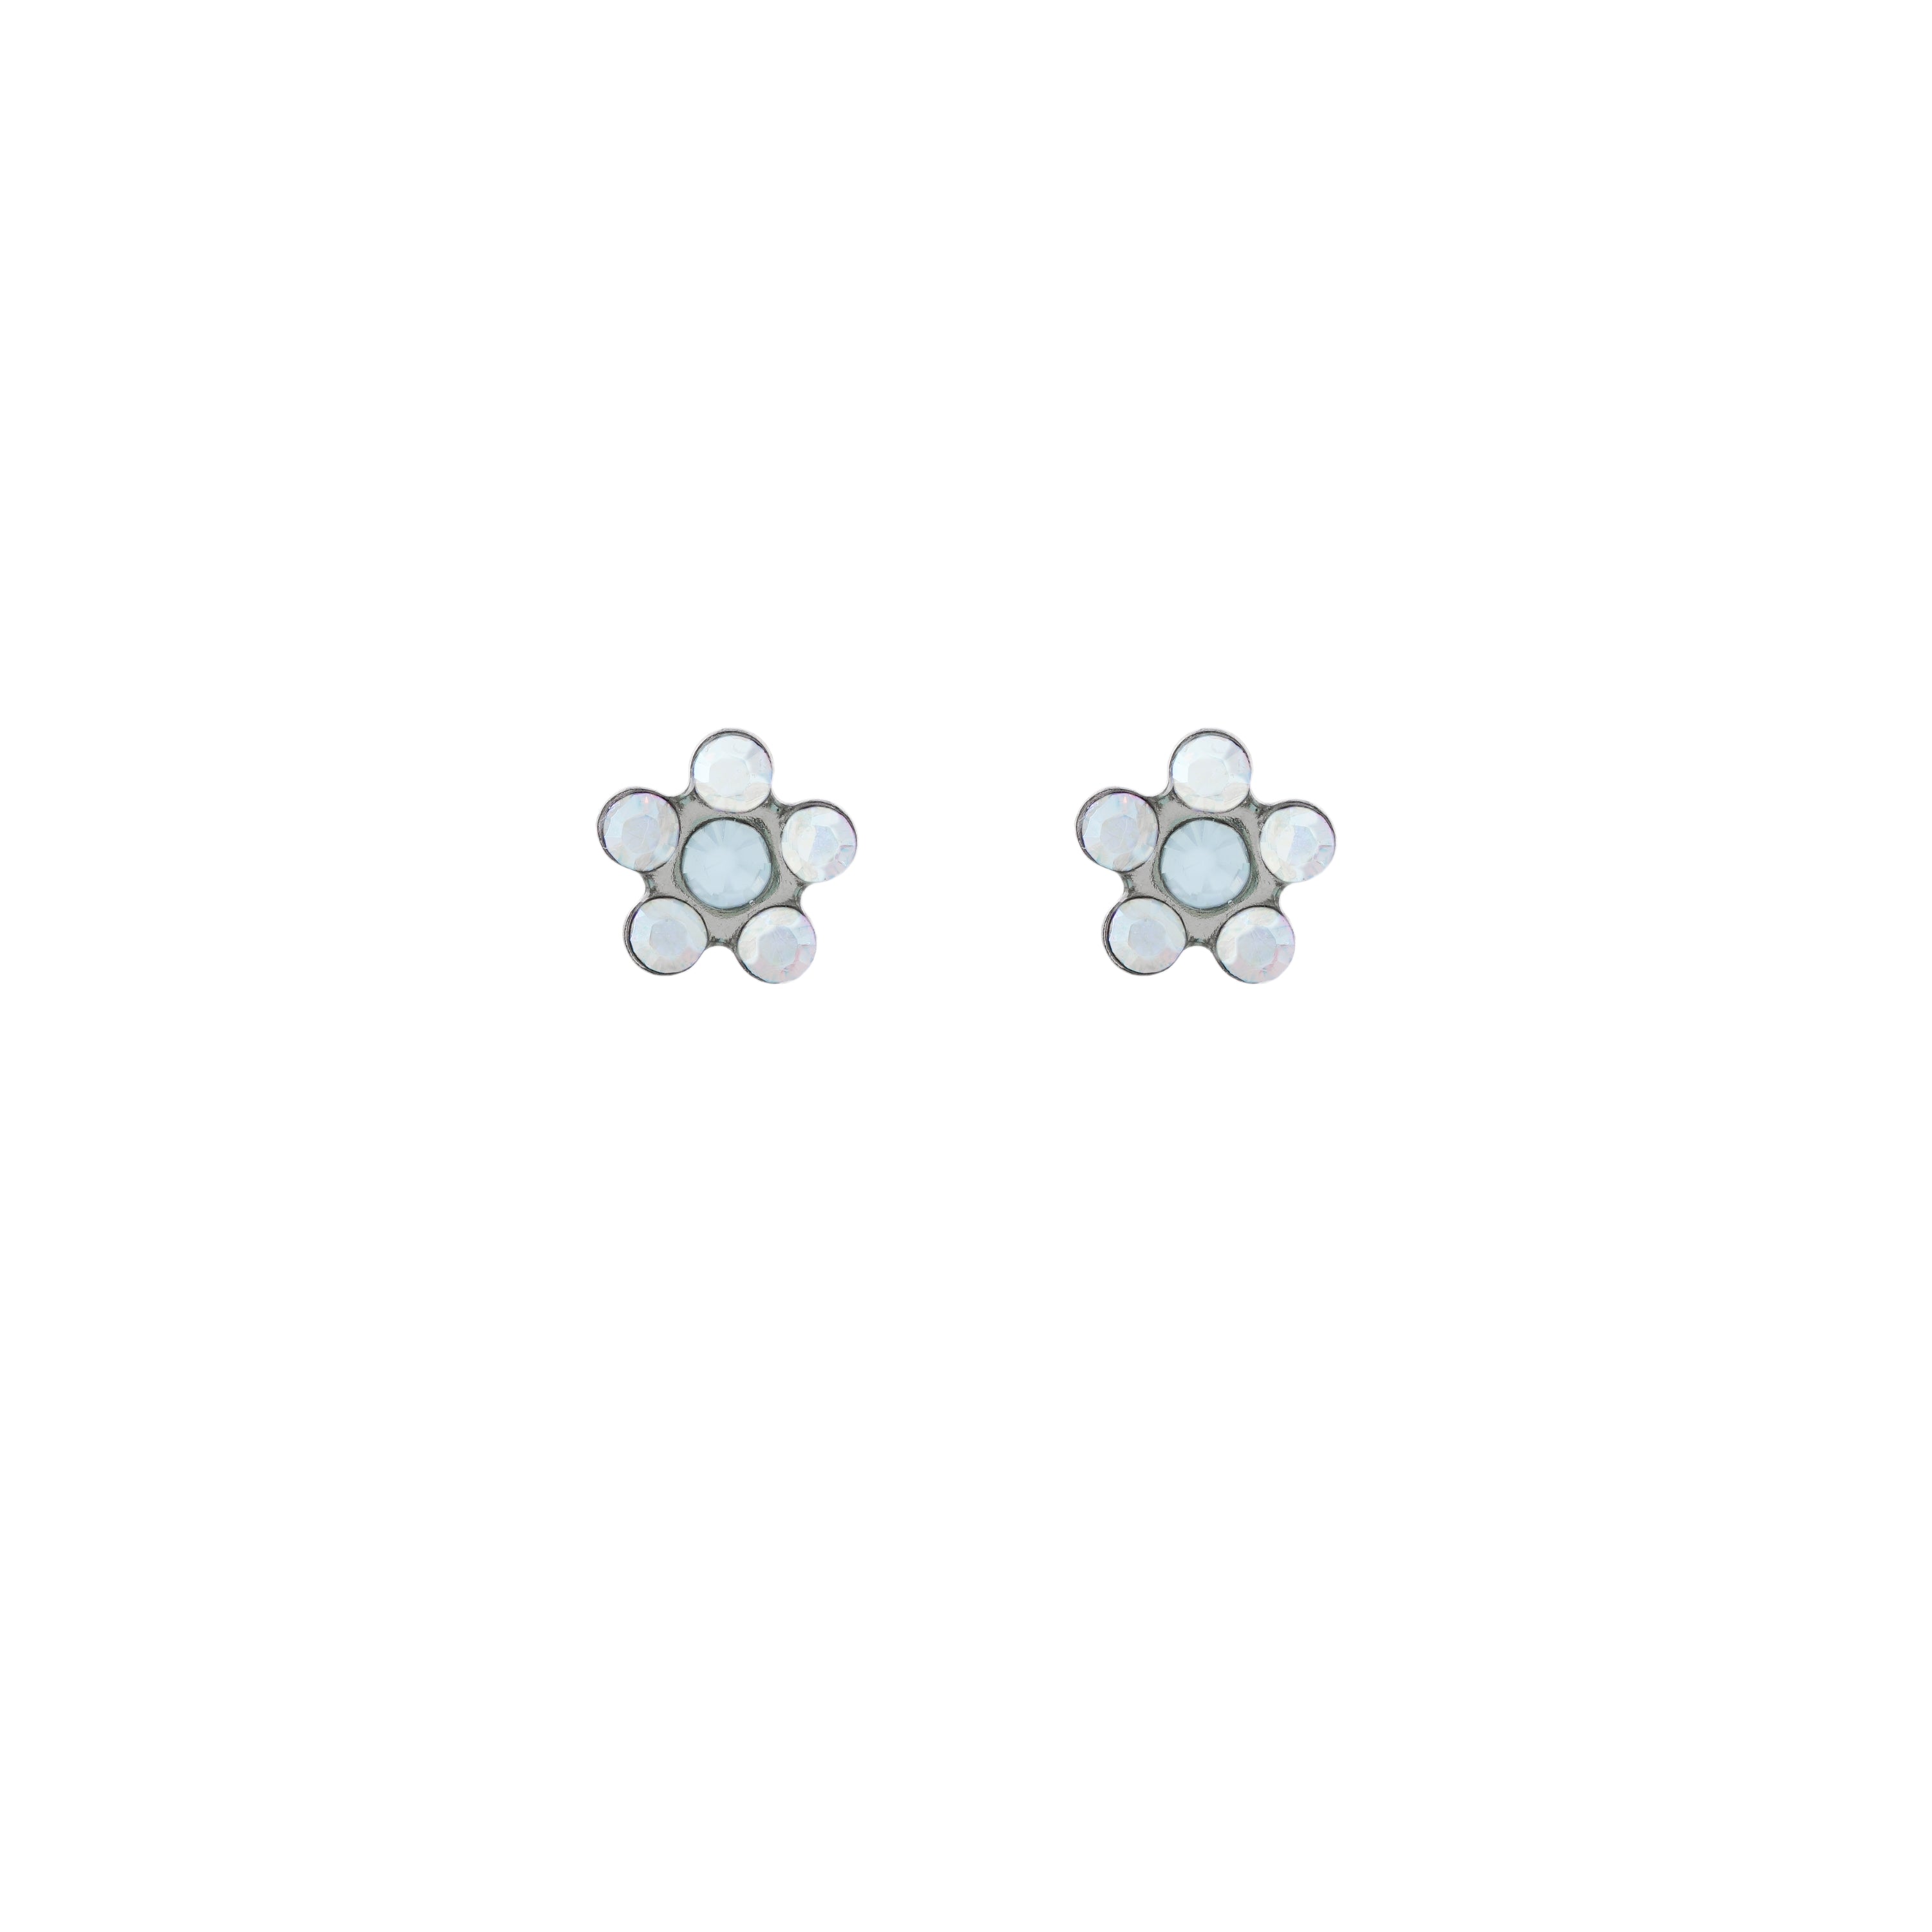 Daisy Ab Crystal-March Aquamarine Allergy-free Stainless Steel Ear Studs For Kids